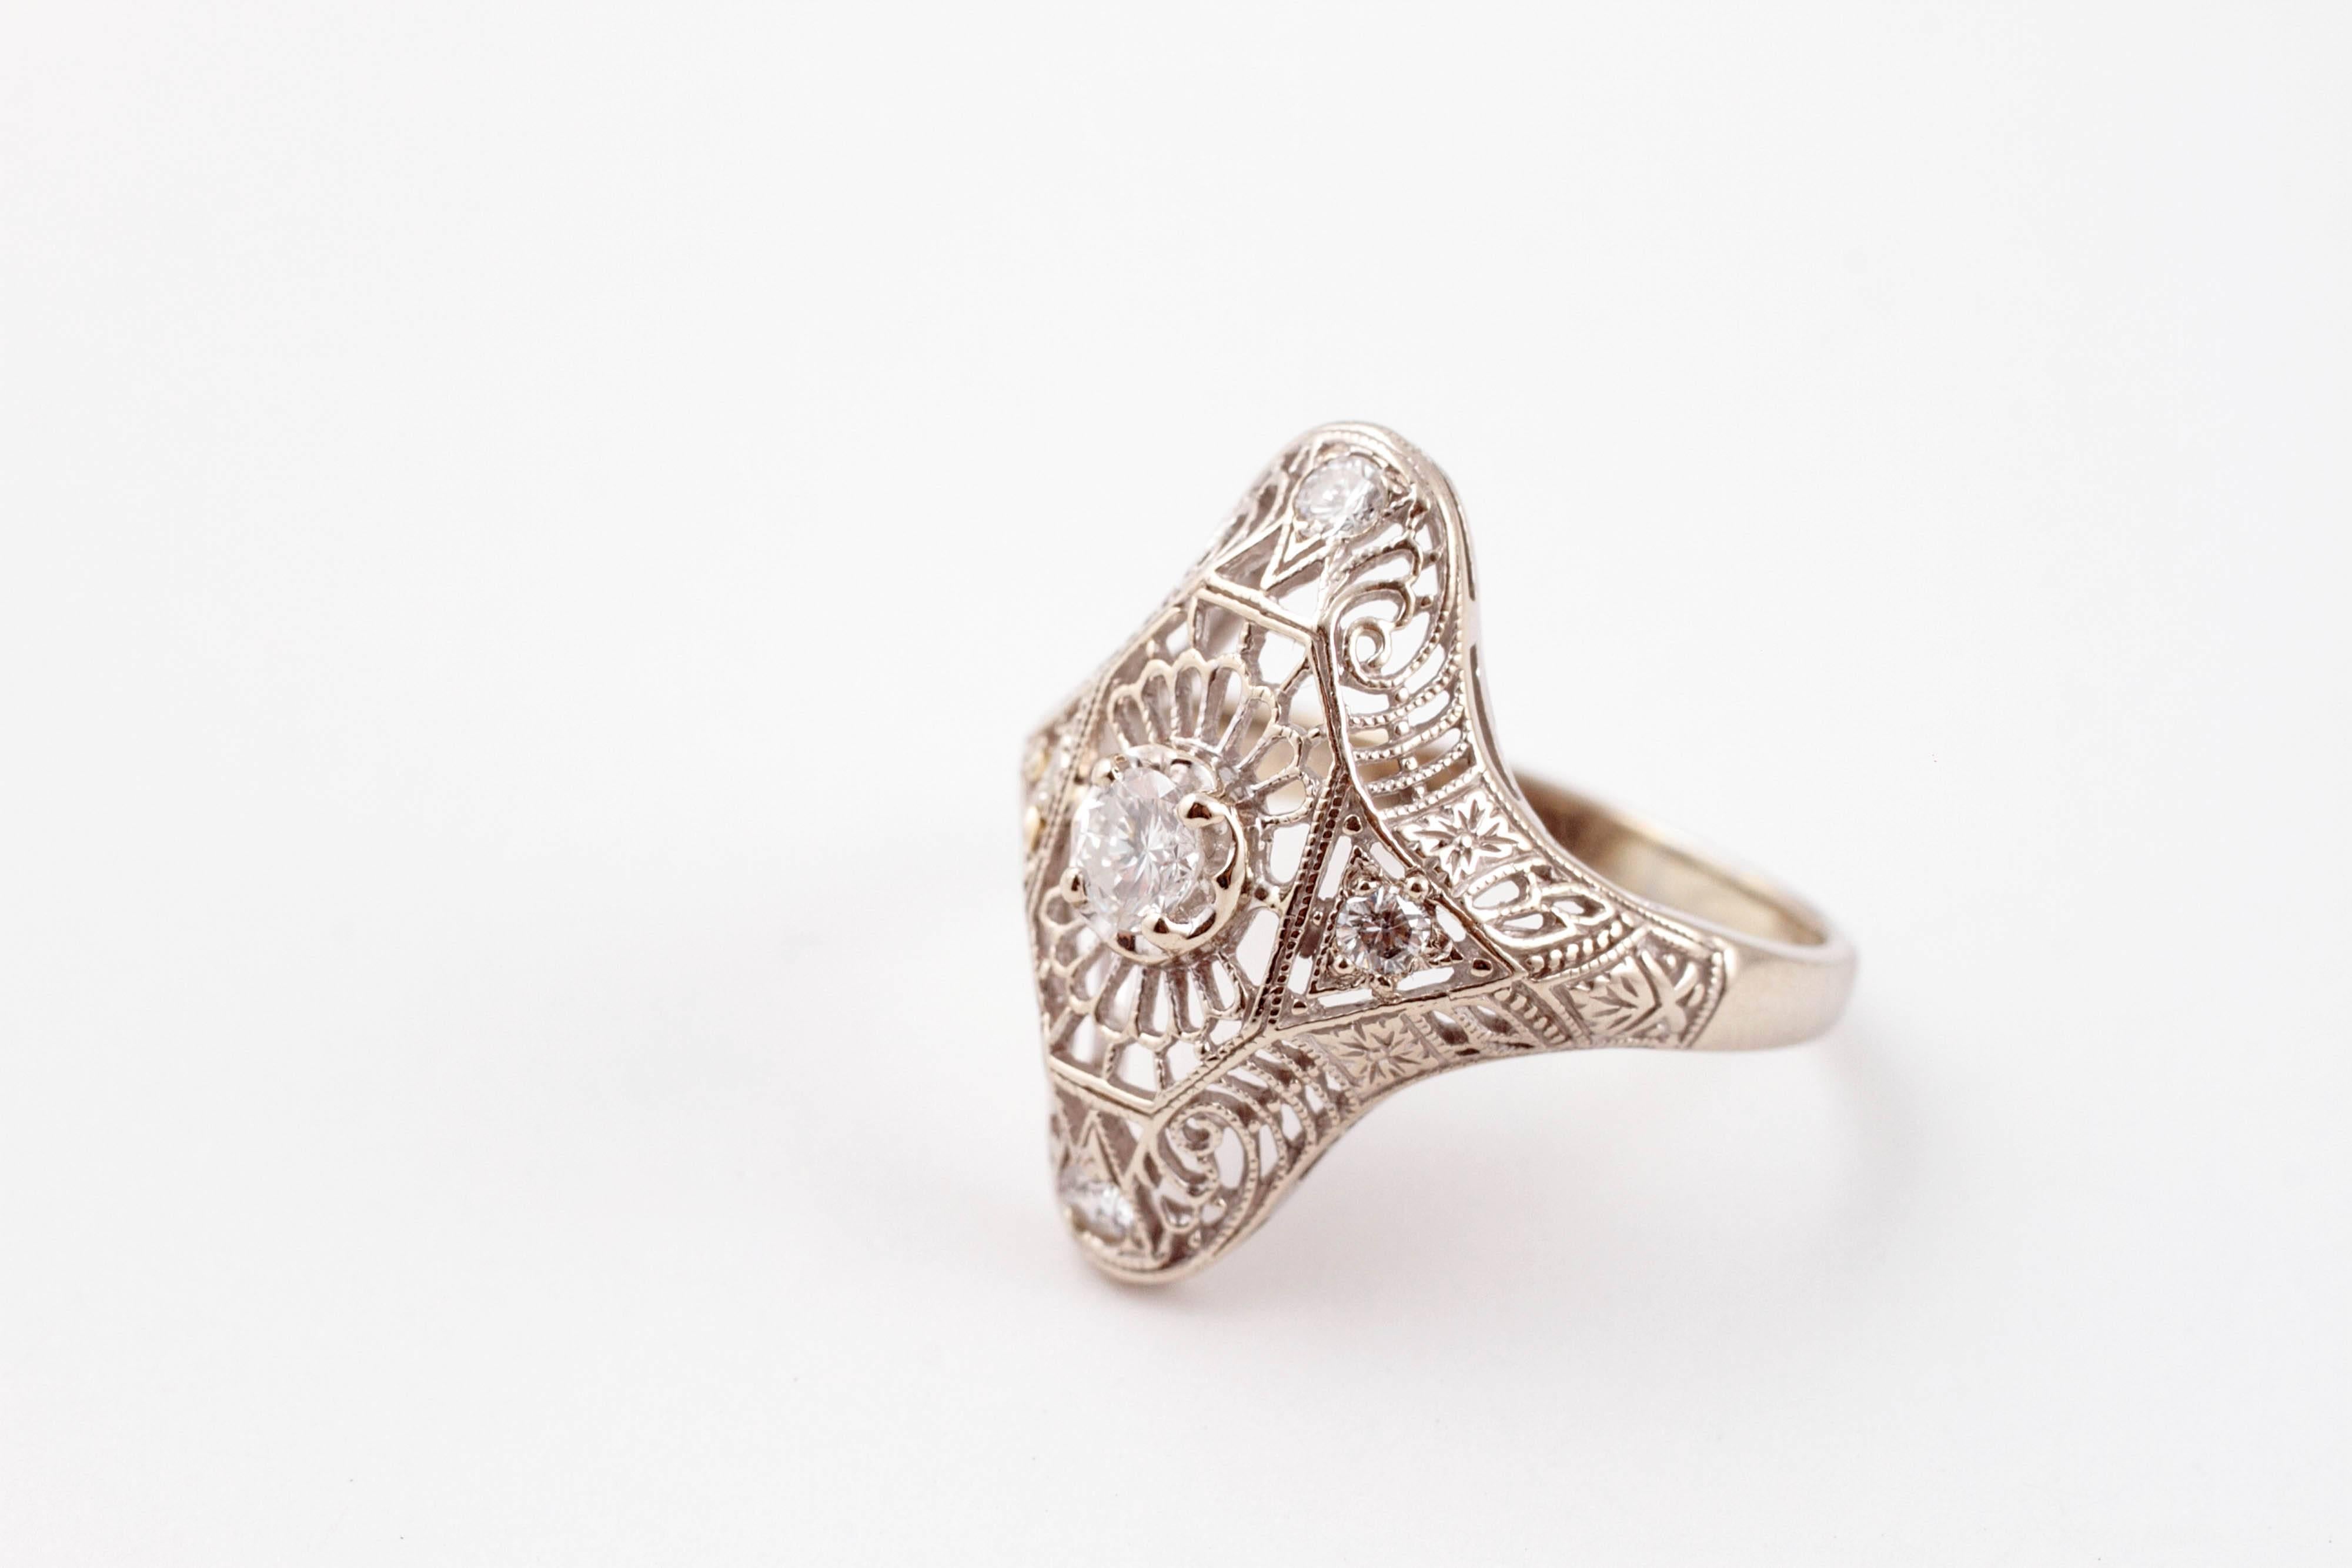 This Art Deco .25 carat diamond filigree ring in 14 karat white gold is the perfect gift for any estate jewelry lover!  Size 7.